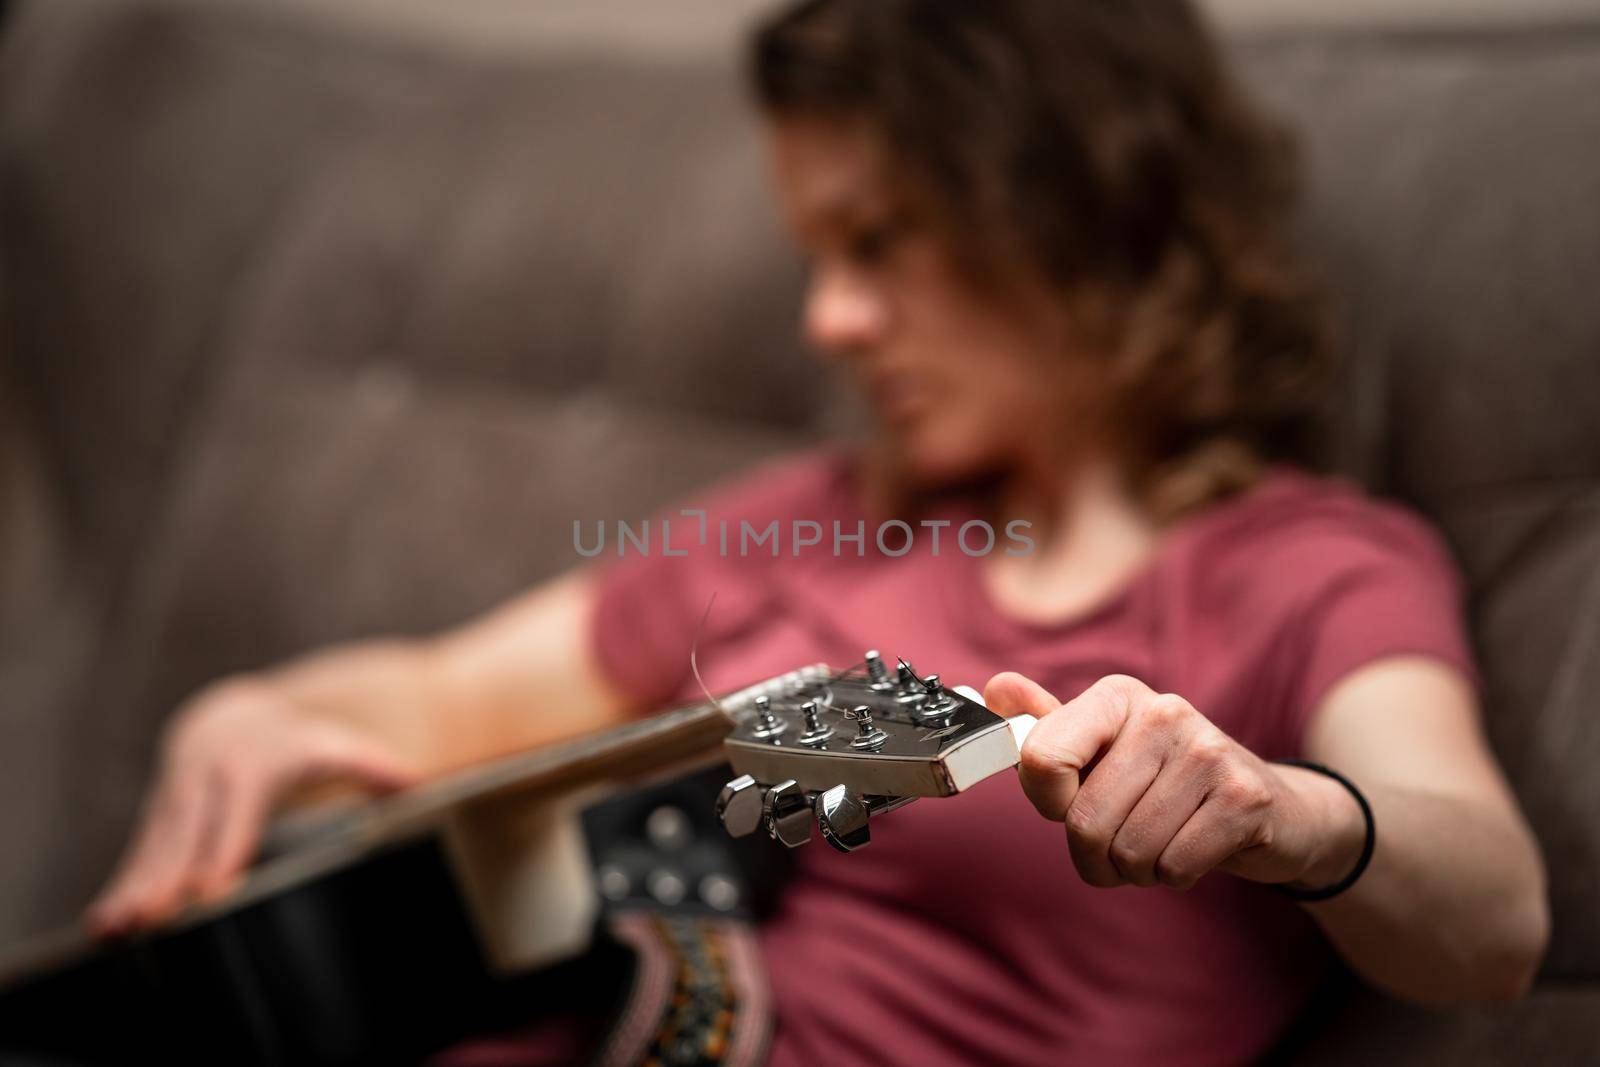 practicing guitar playing at home during online lessons by Edophoto